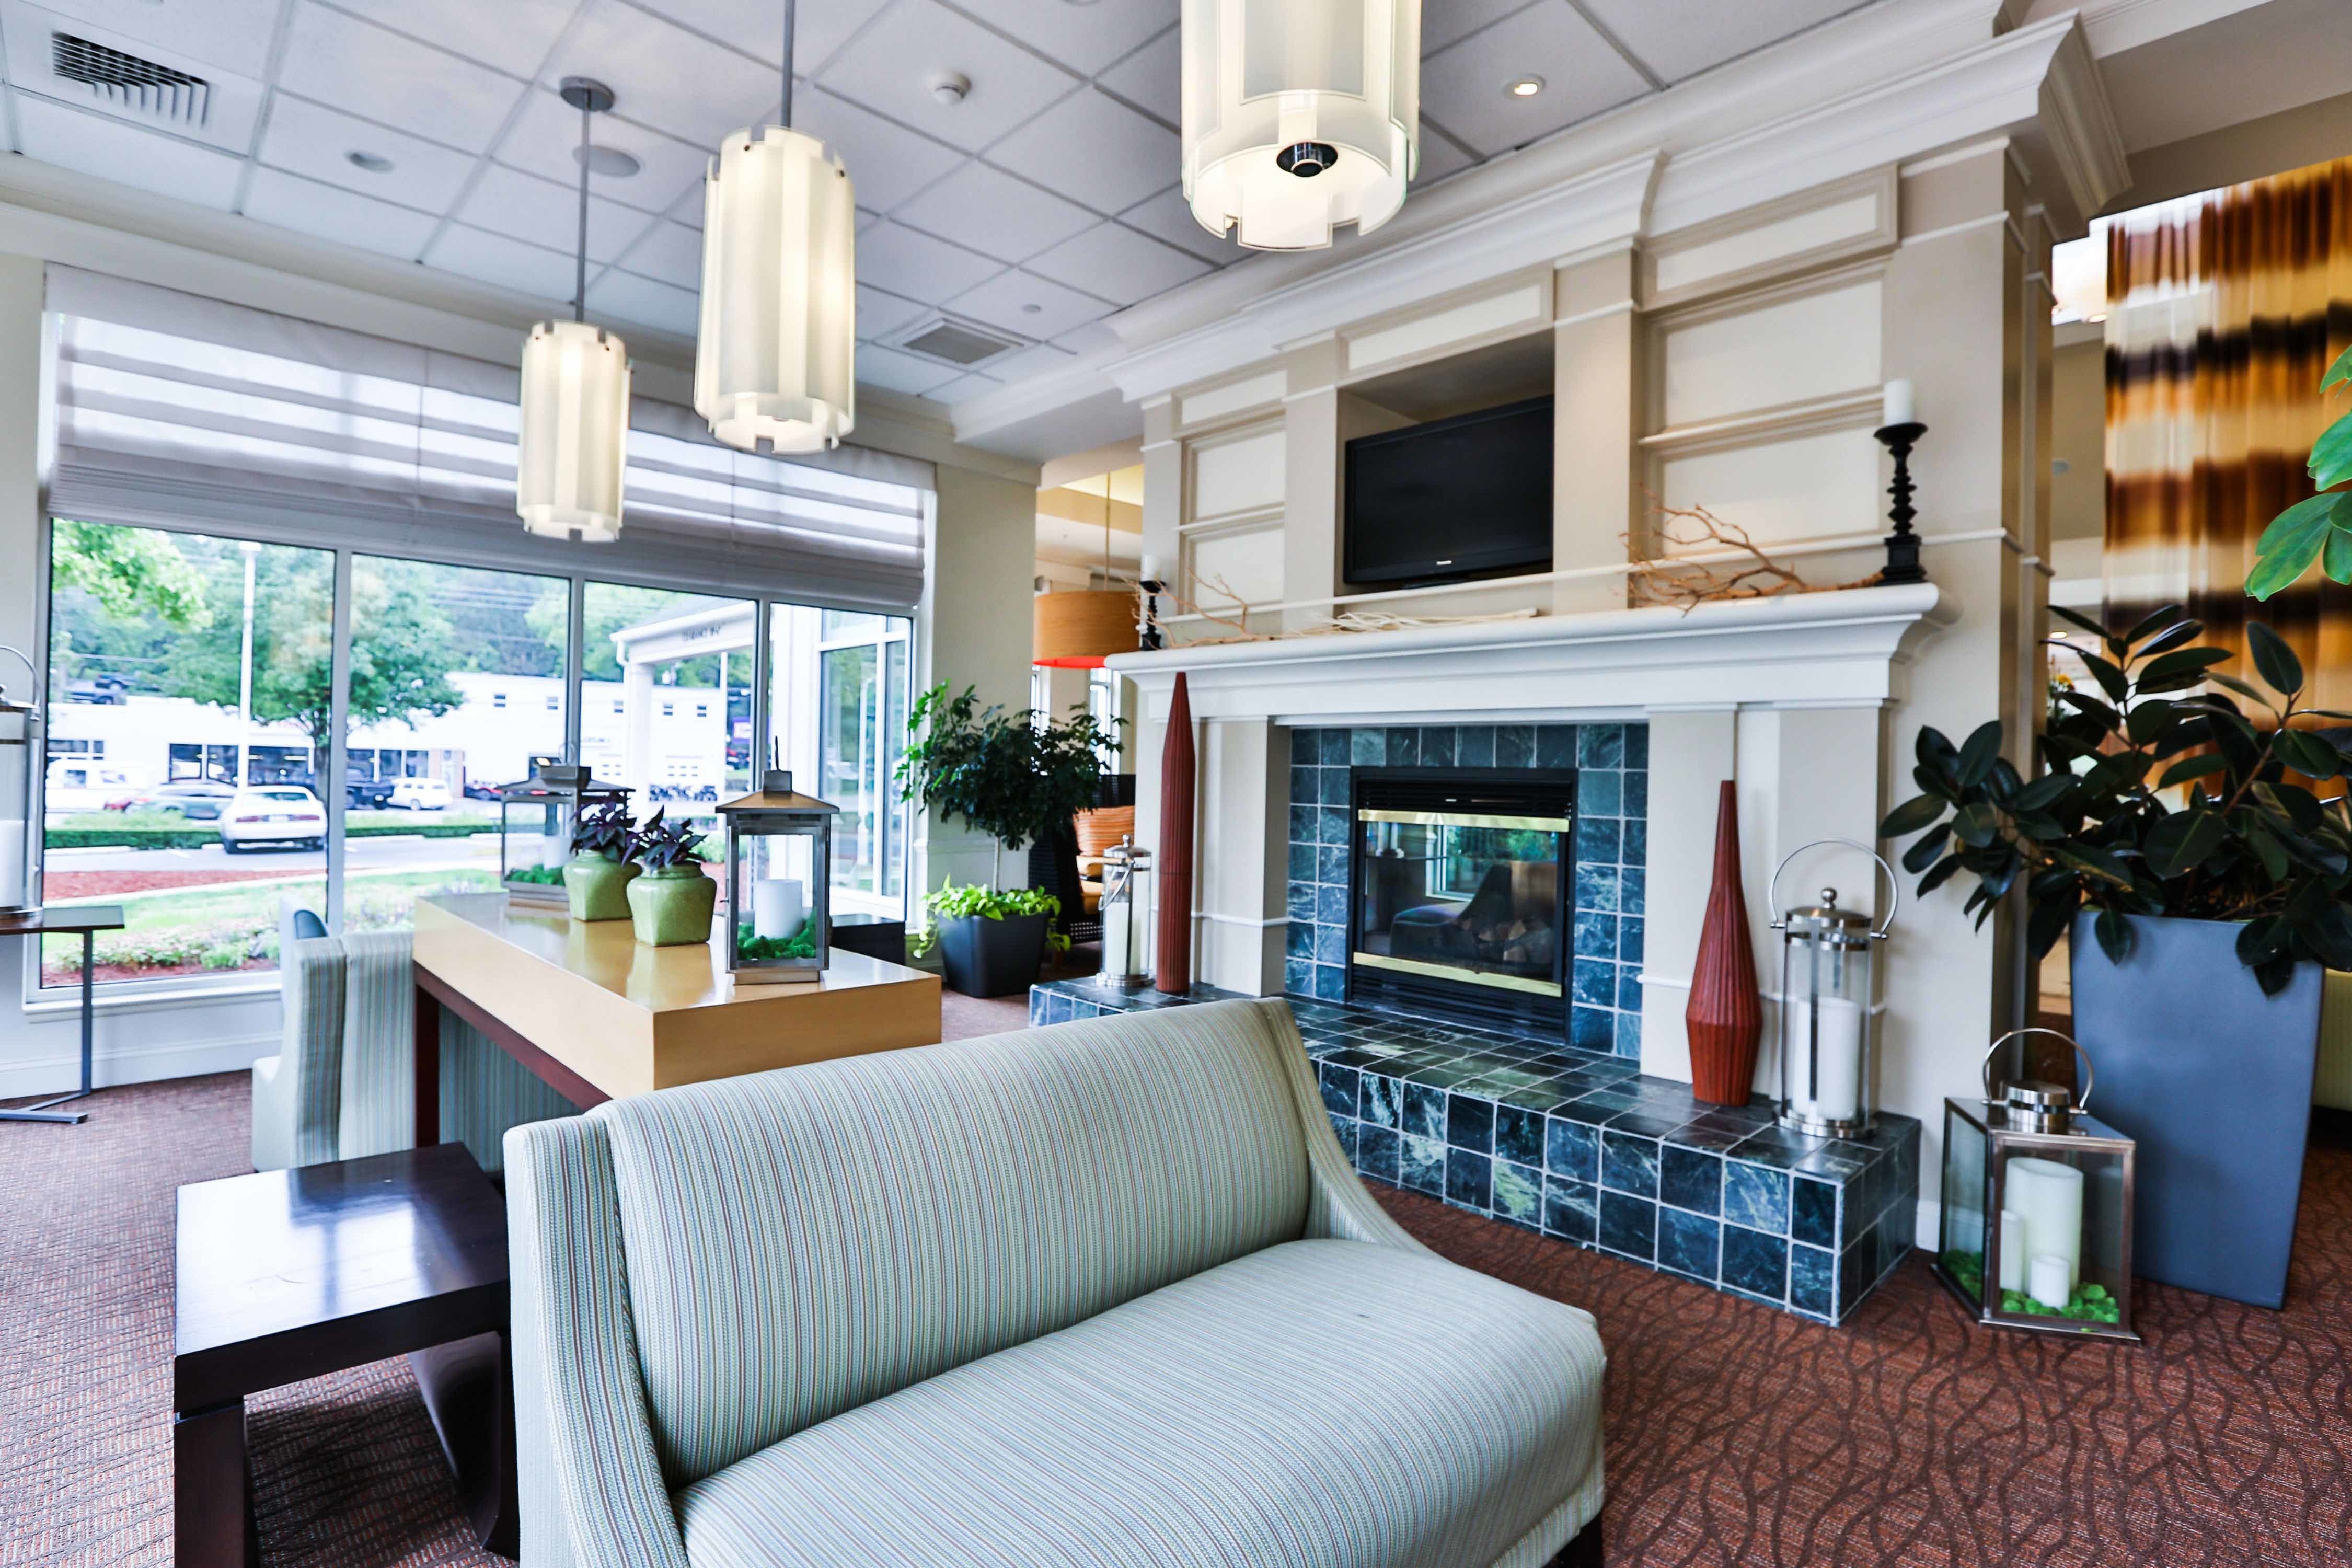 Hotel Lobby Seating Area With Fireplace